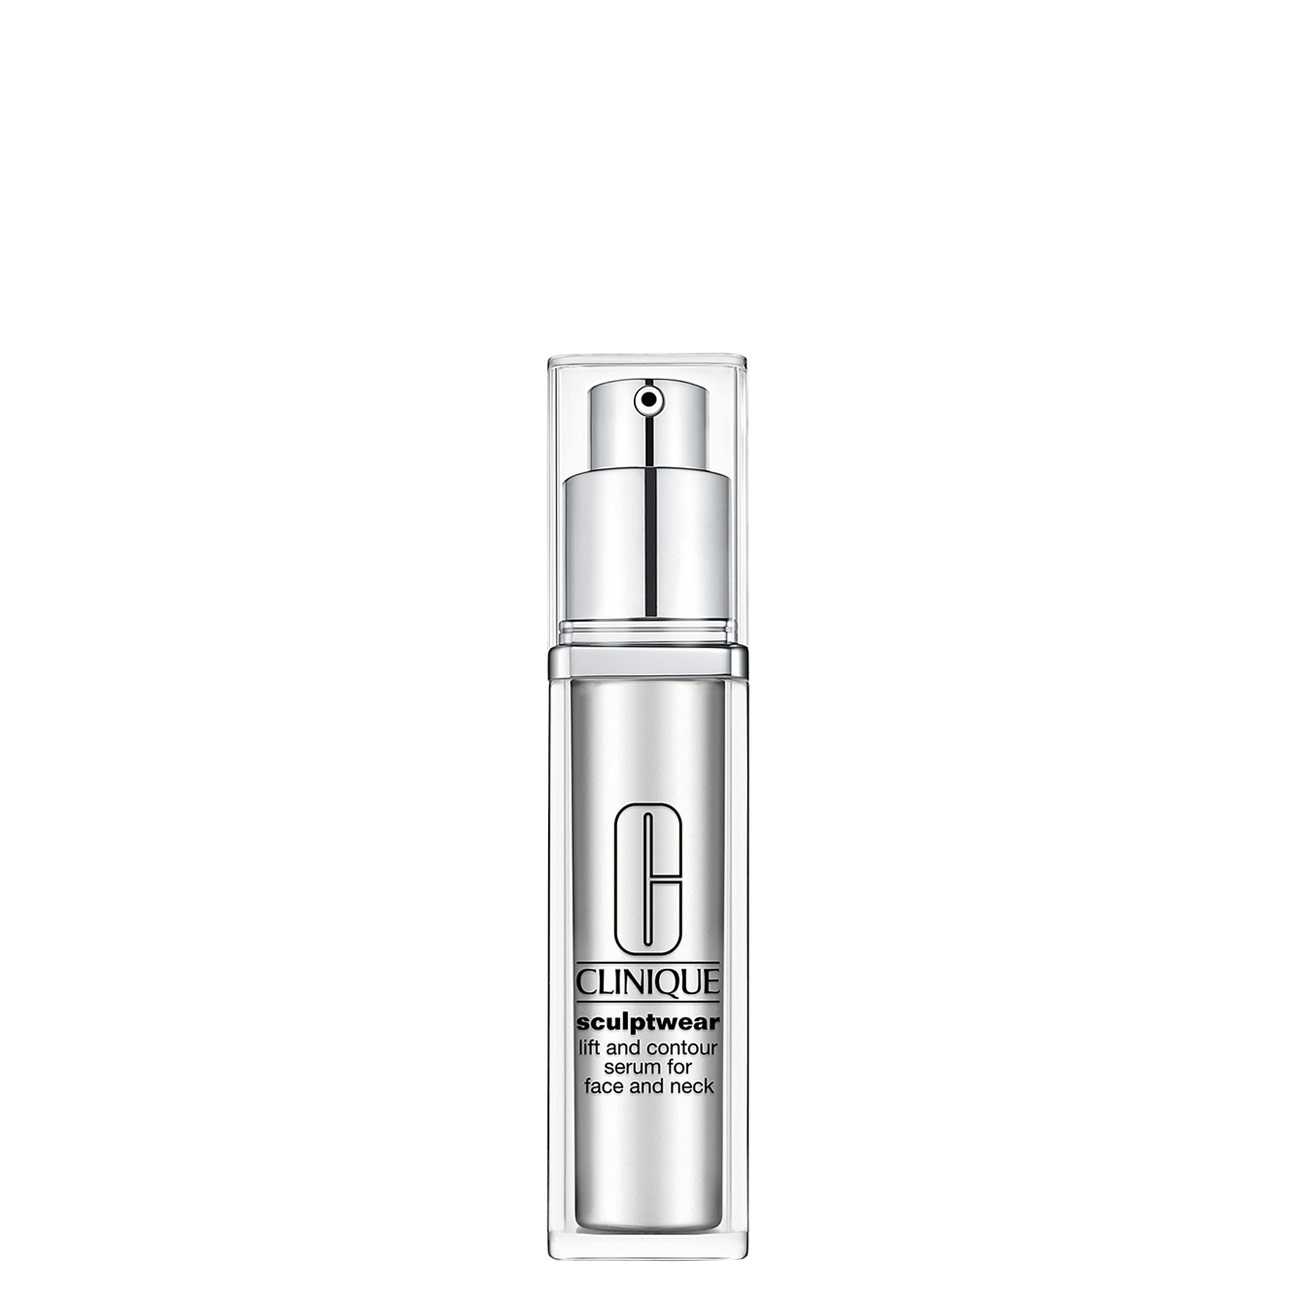 SCULPTWEAR LIFT AND CONTOUR 50 ml and